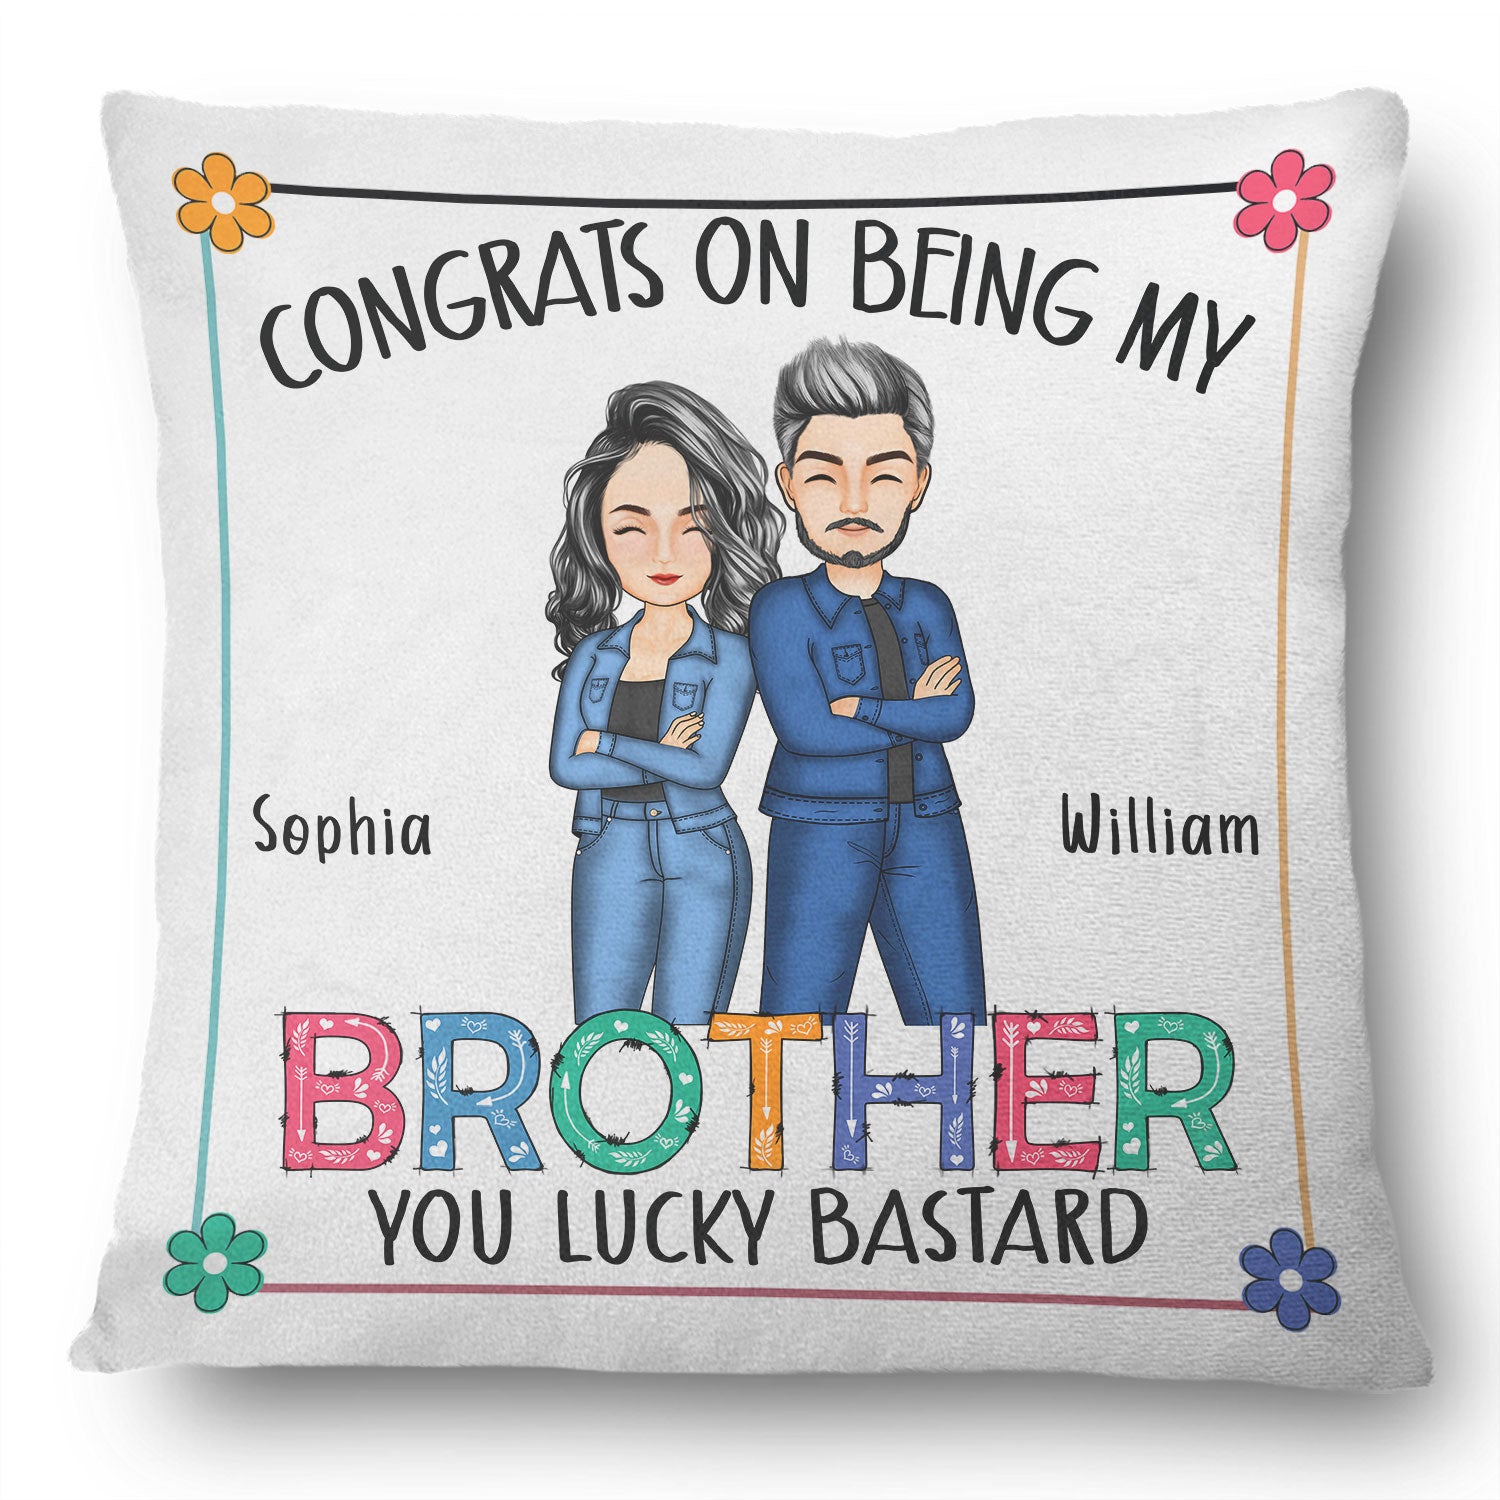 Sibling Congrats On Being My Brother - Gift For Sibling - Personalized Pillow